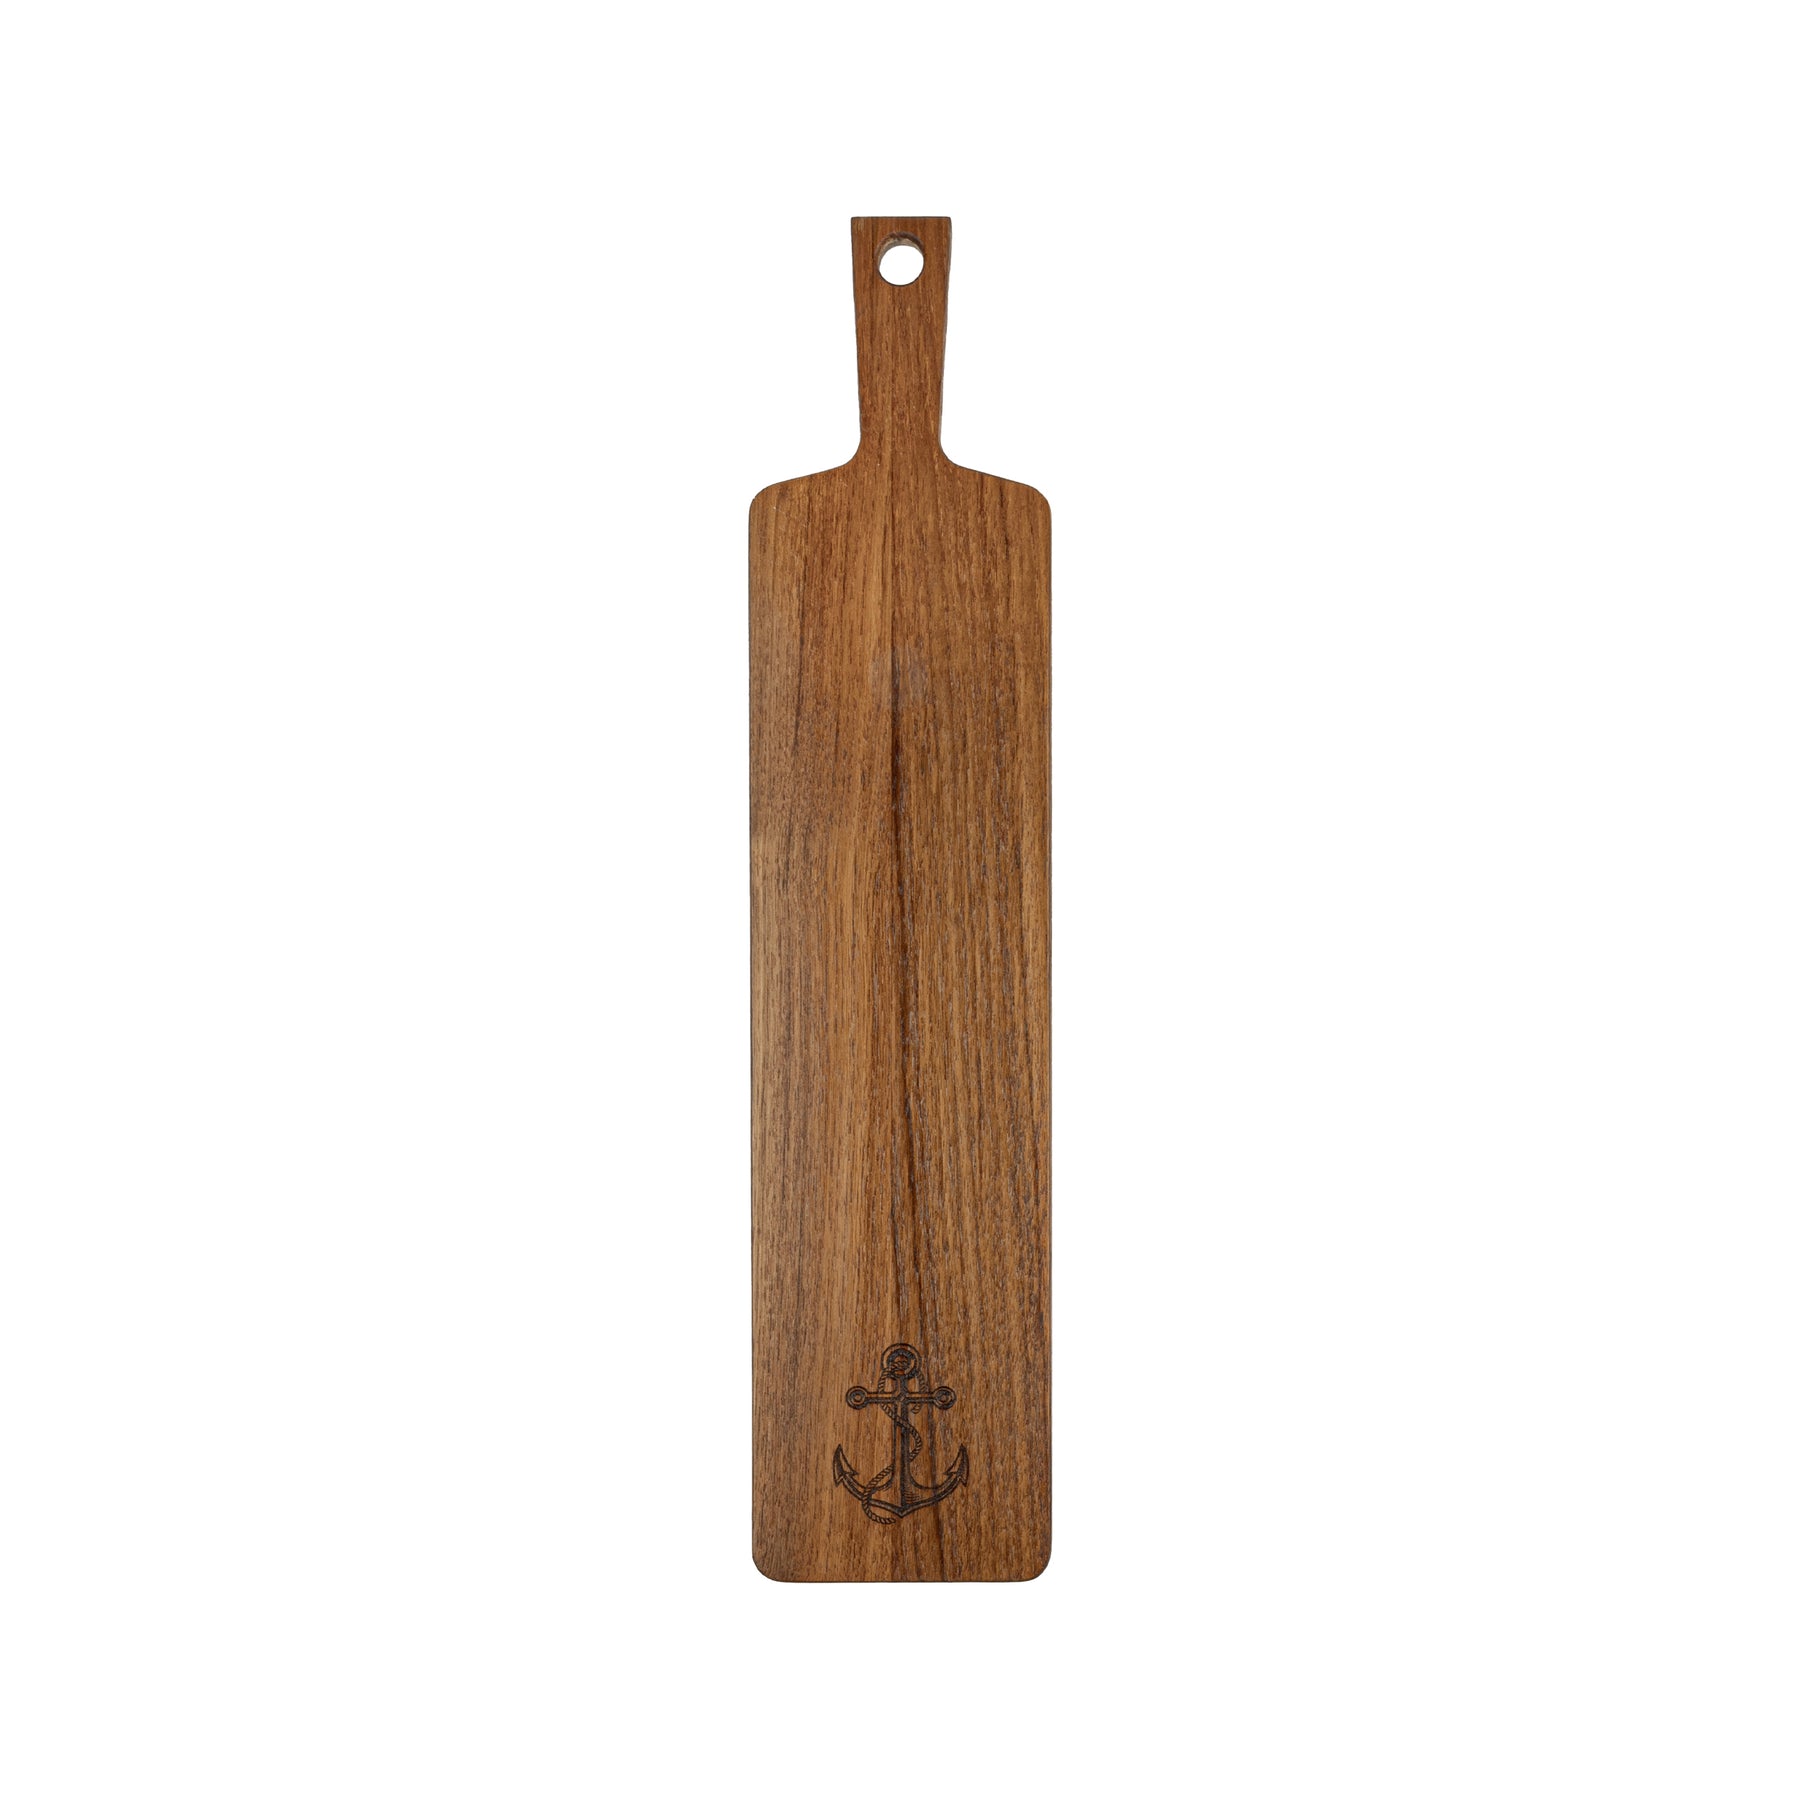 Chef's Collection Teak Appetizer Serving Board - Anchor - 5" x 18" - 60765ANCC